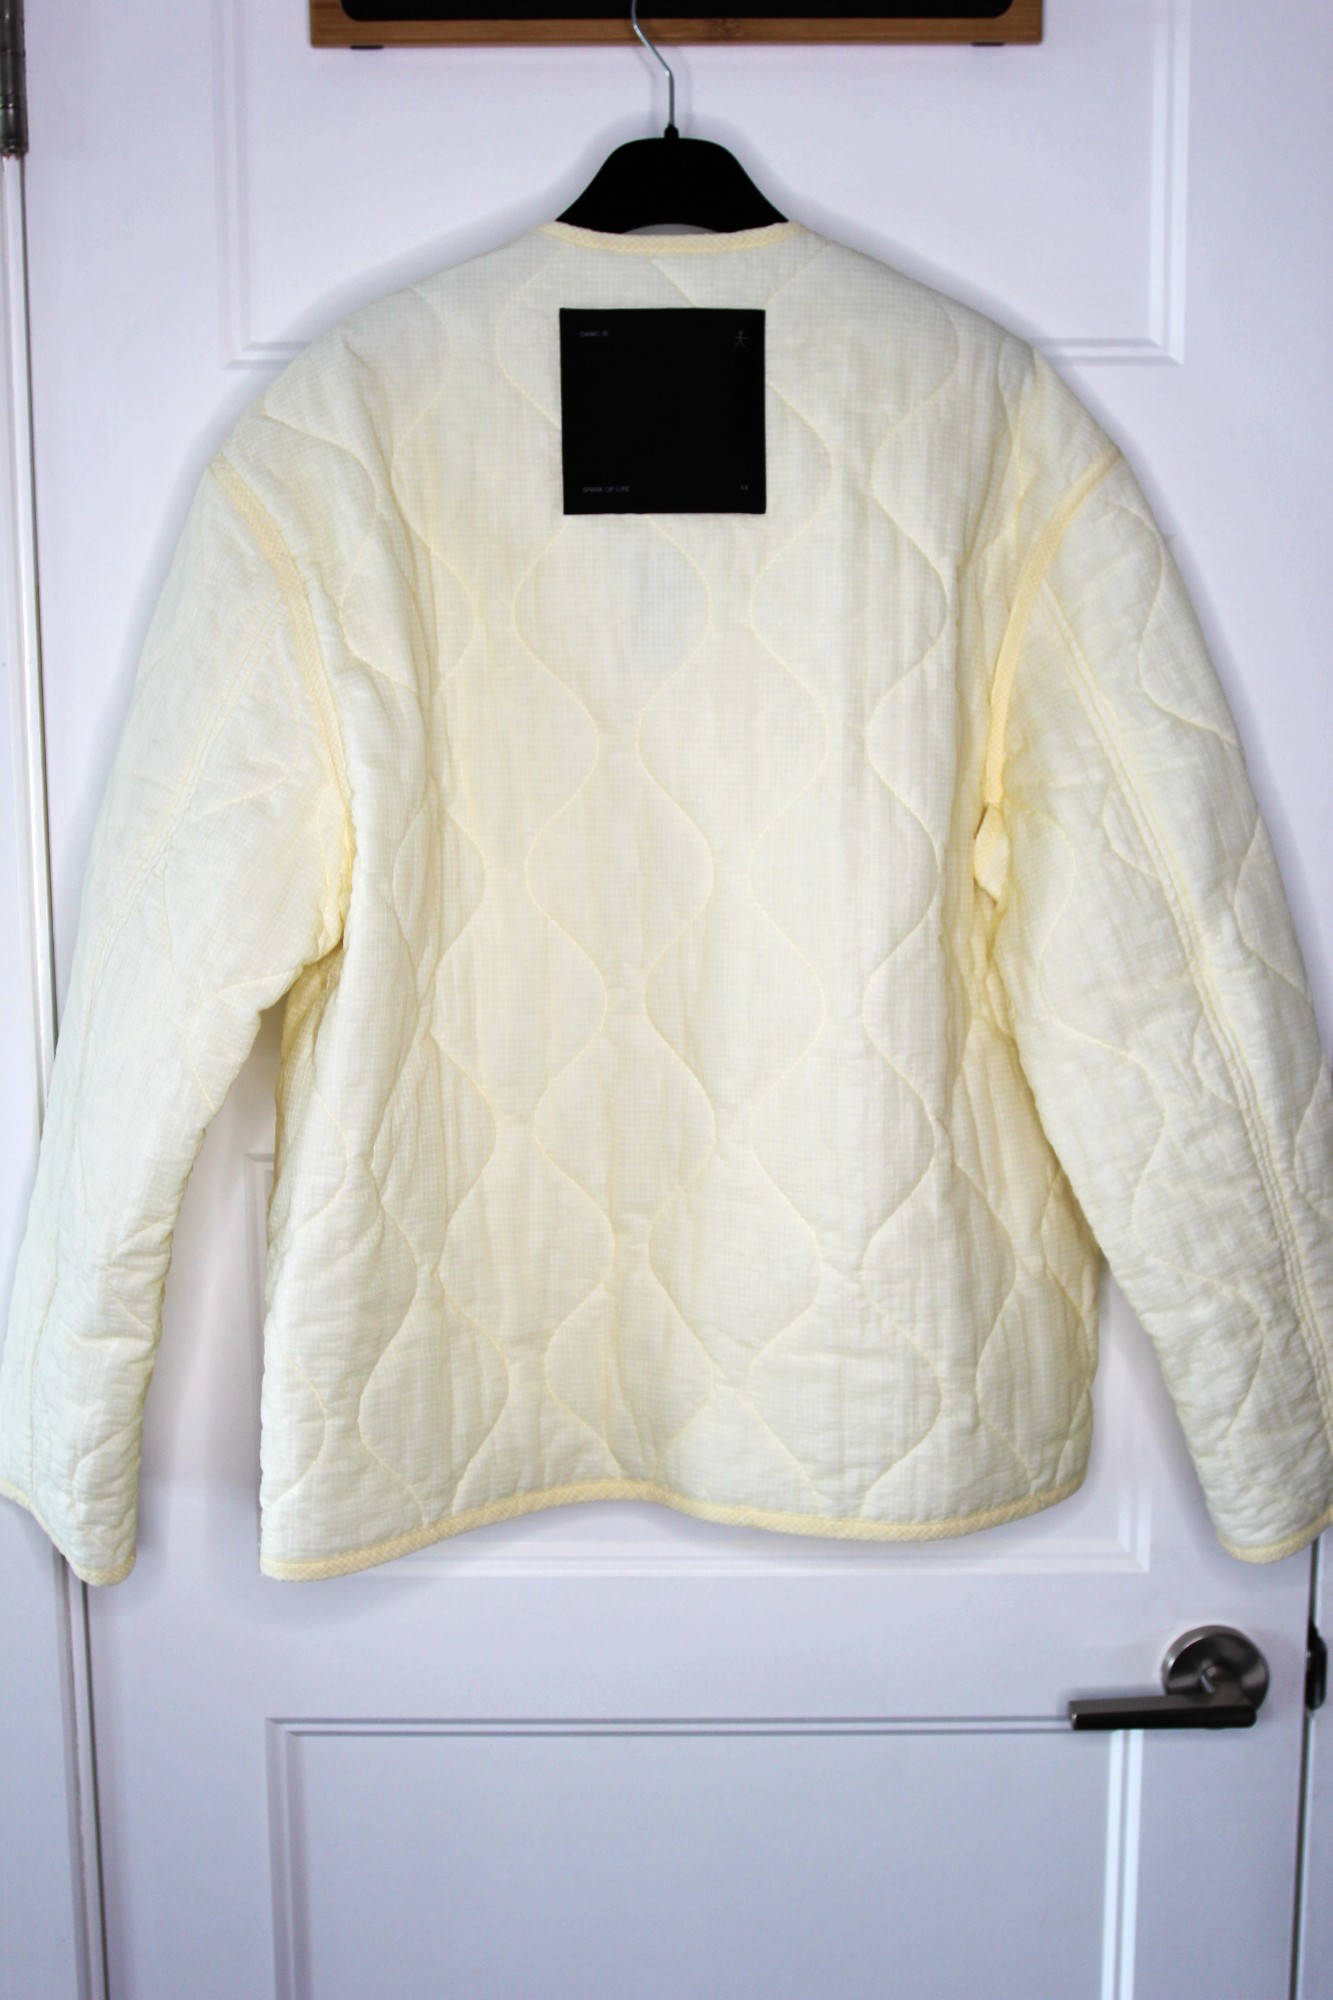 BNWT SS23 OAMC OFF-WHITE QUILTED JACKET M - 3